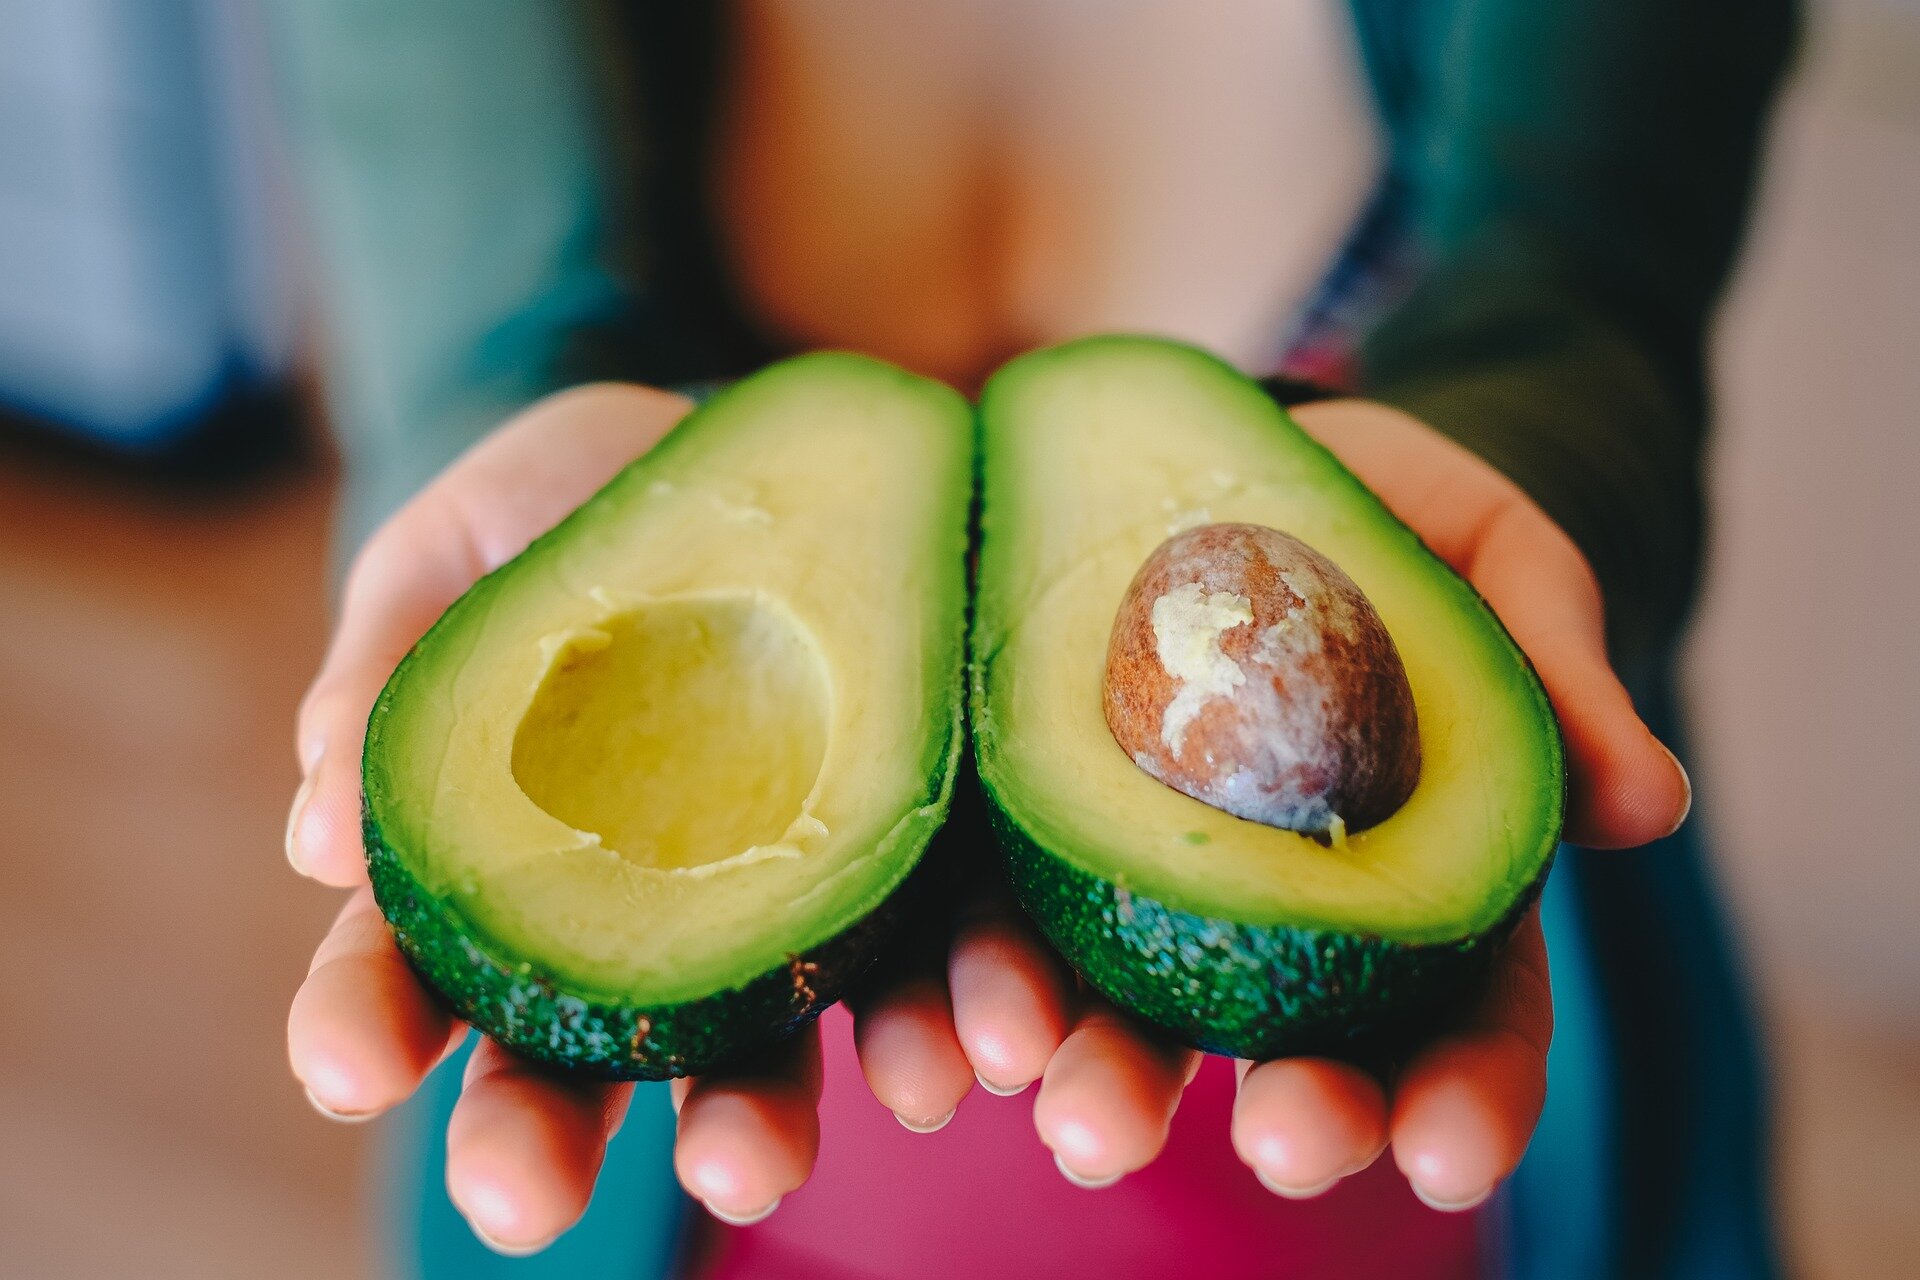 is avocados good for cardiac diet